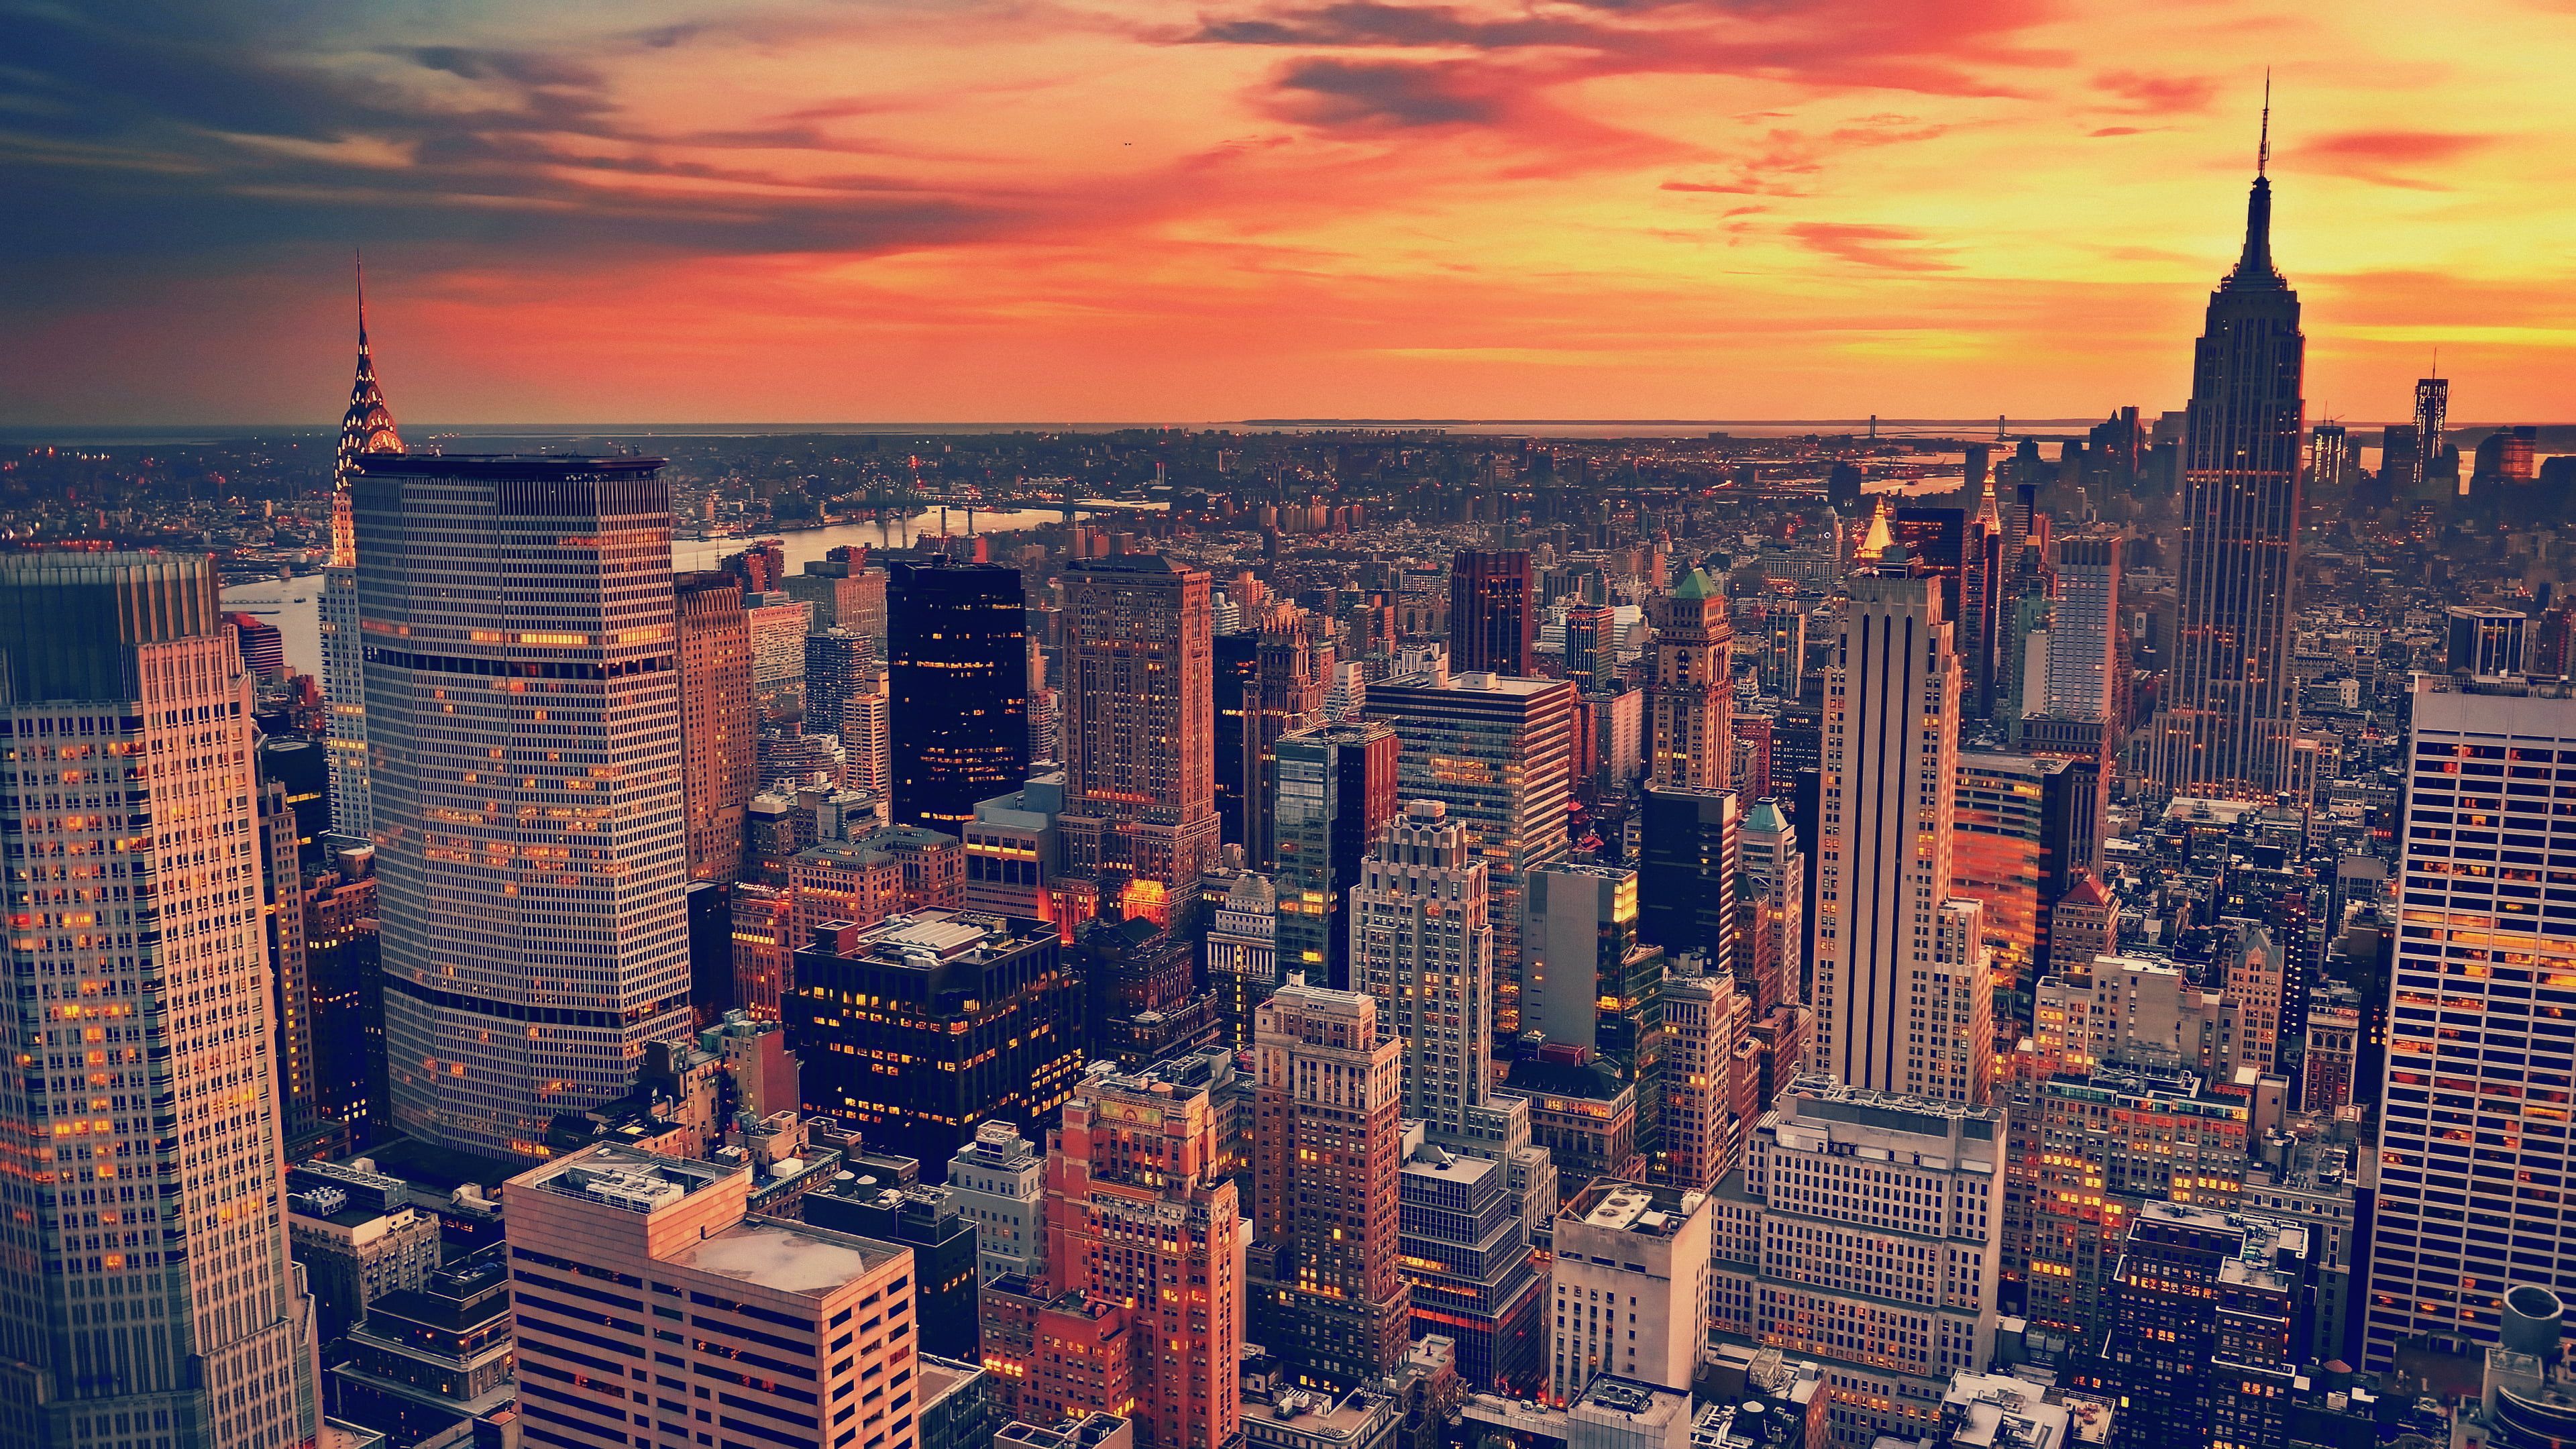 New York Sunset Wallpapers 4k, HD New York Sunset Backgrounds on